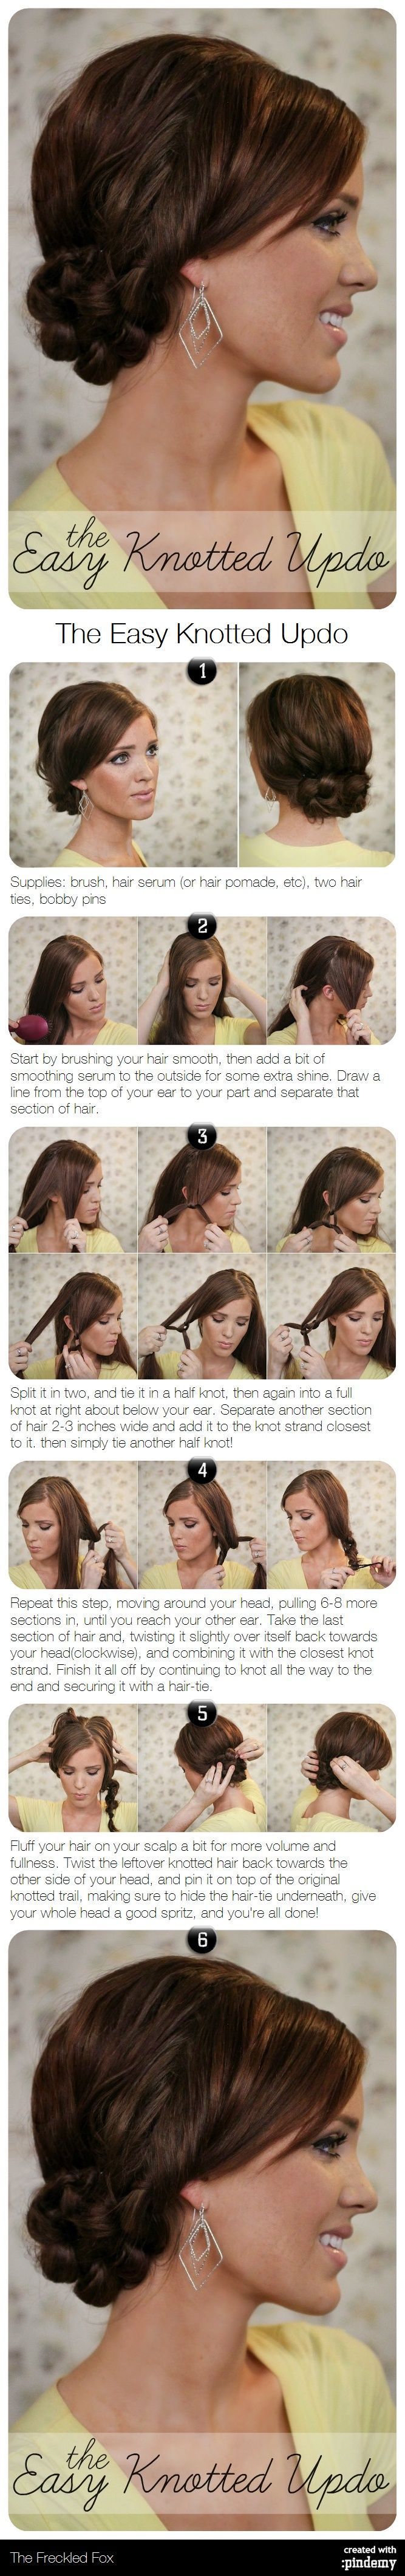 The Easy Knotted Updo Hair Tutorial